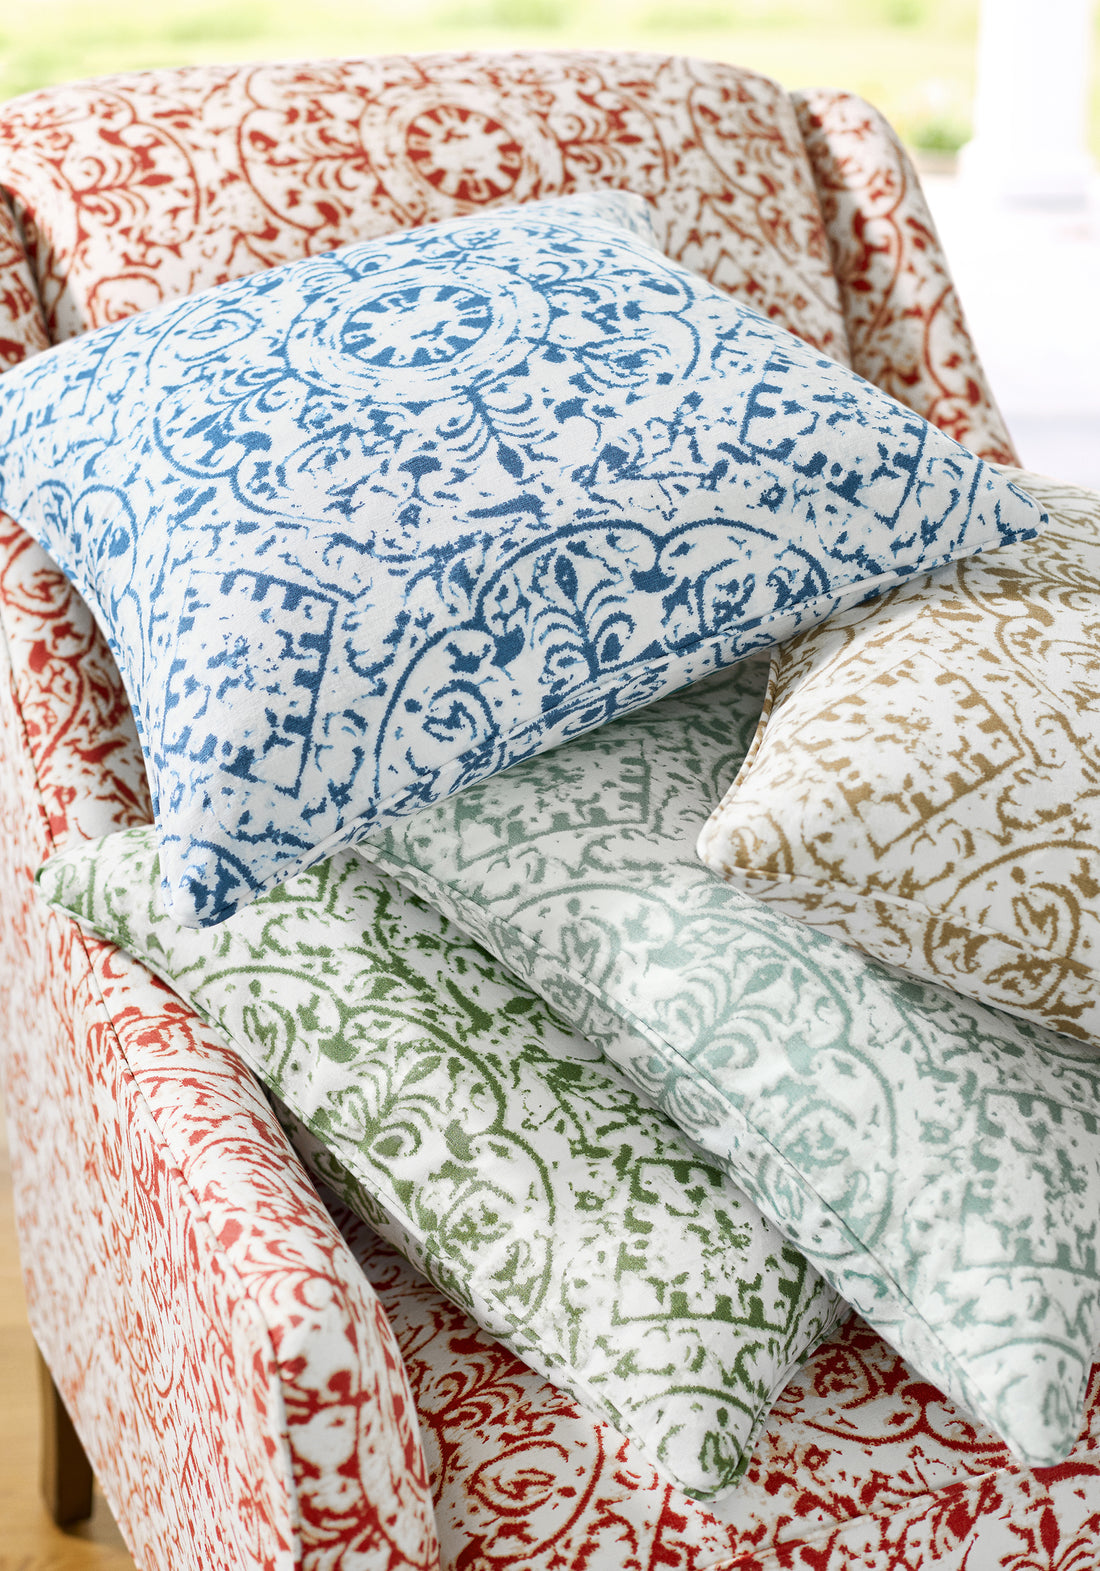 Pillows featuring Havana fabric in navy color - pattern number F981312 - by Thibaut in the Montecito collection